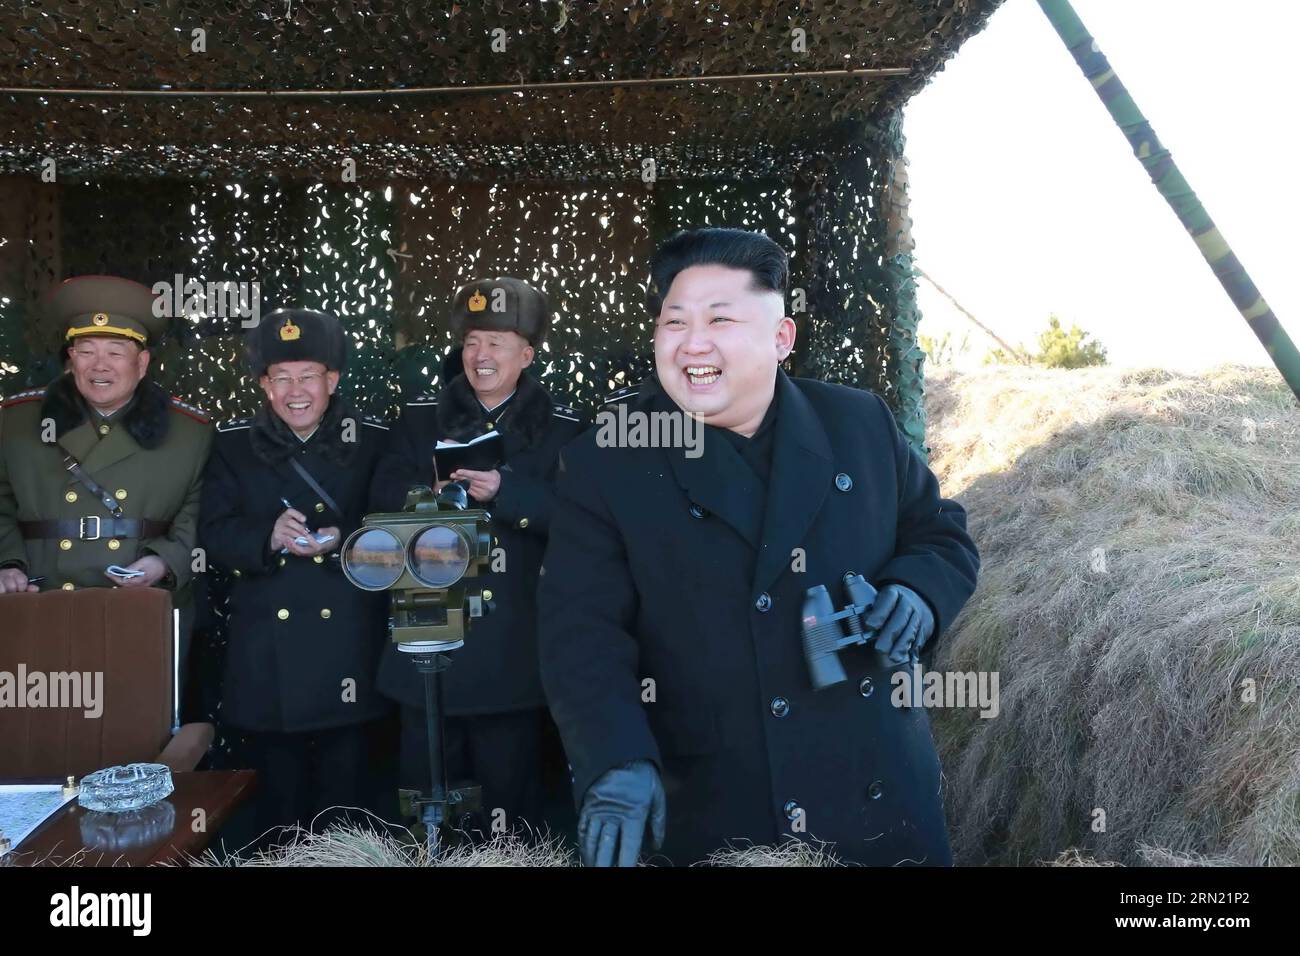 (150131) -- PYONGYANG, Jan. 31 -- Photo provided by Korean Central News Agency () on Jan. 31, 2015 shows top leader of the Democratic People s Republic of Korea (DPRK) Kim Jong Un (front) inspecting a drill of the Korean People s Army (KPA). The fighter airmen and combined submarine units successively carried out the drill. Kim Jong Un gave instructions for bolstering up the operation capabilities of the units of all services. He said that the DPRK is ready to counter any war including a war by conventional armed forces or a nuclear war. ) (lmz) DPRK-KIM JONG UN-DRILL-INSPECTION KCNA PUBLICATI Stock Photo